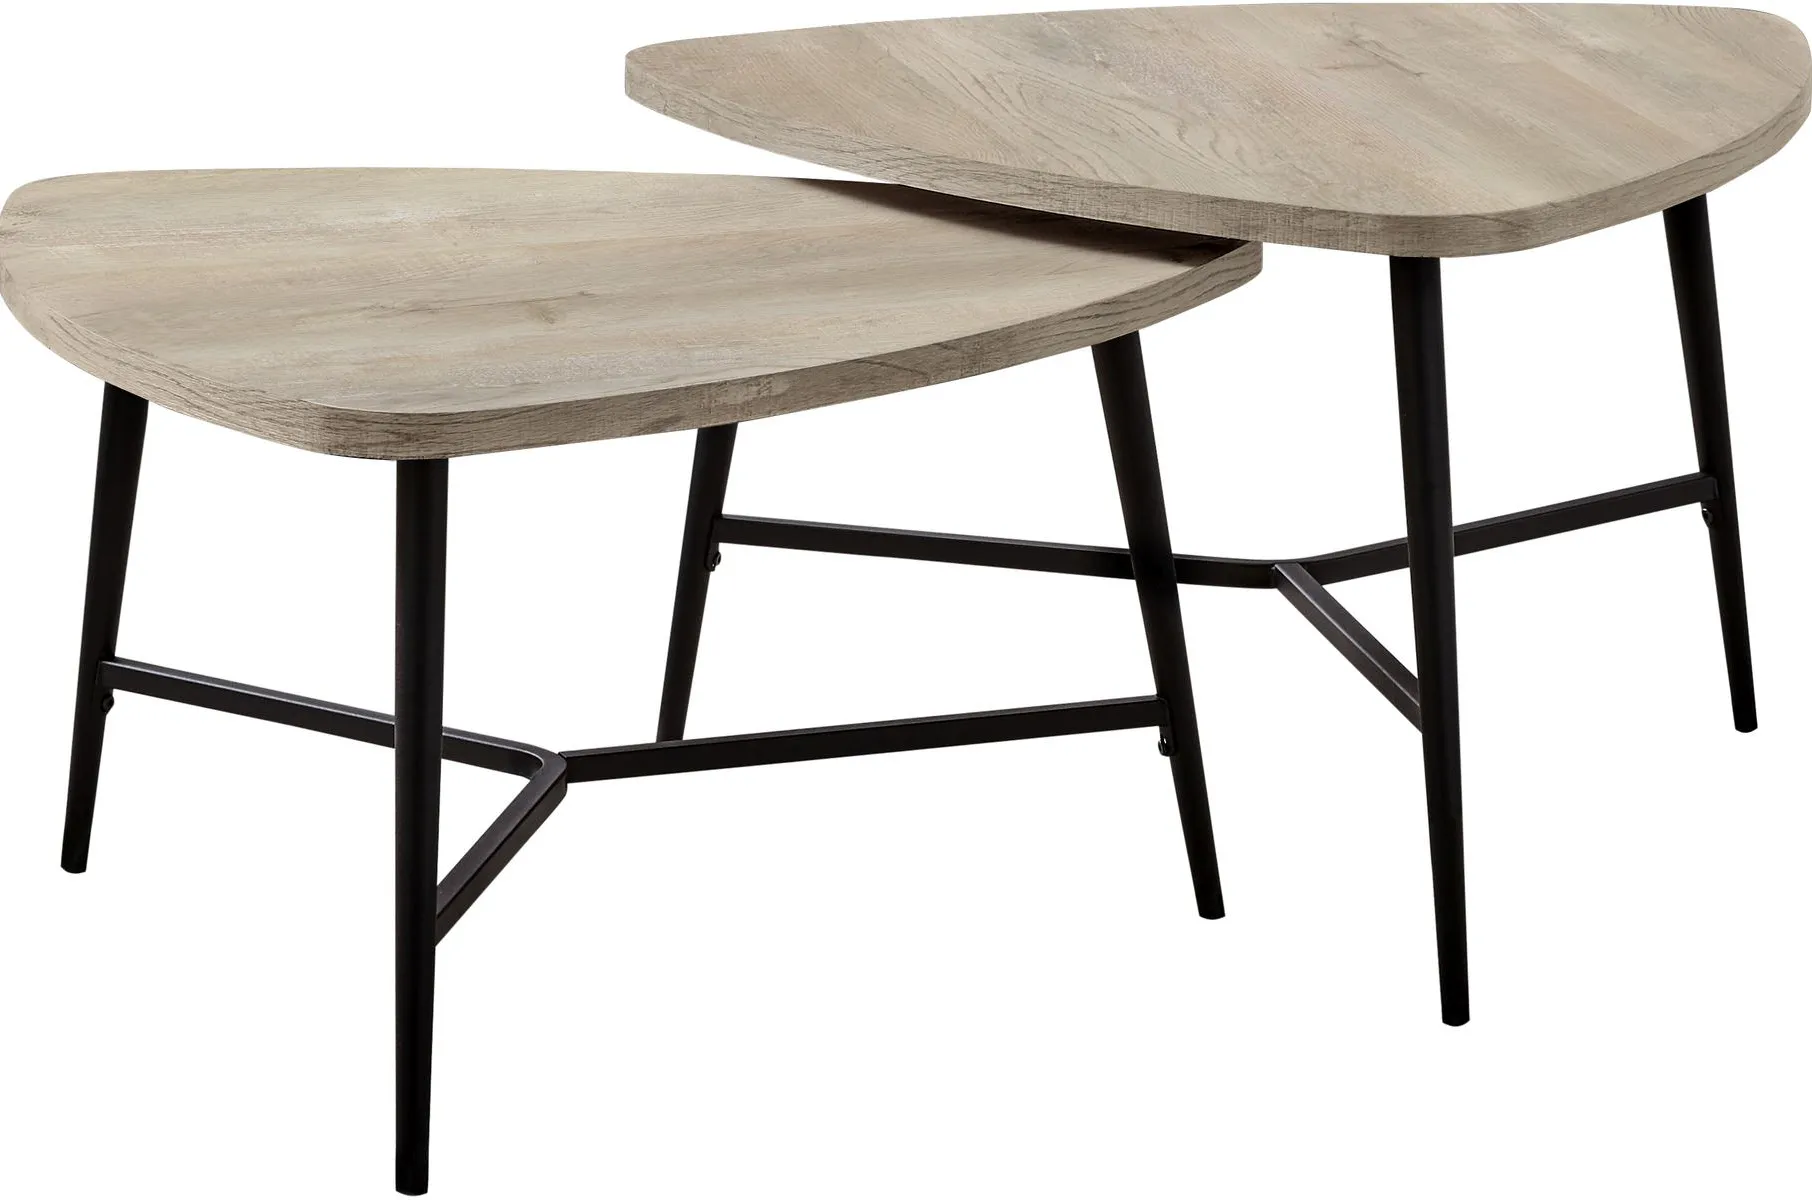 Table Set, 2Pcs Set, Coffee, End, Side, Accent, Living Room, Metal, Laminate, Beige, Black, Contemporary, Modern